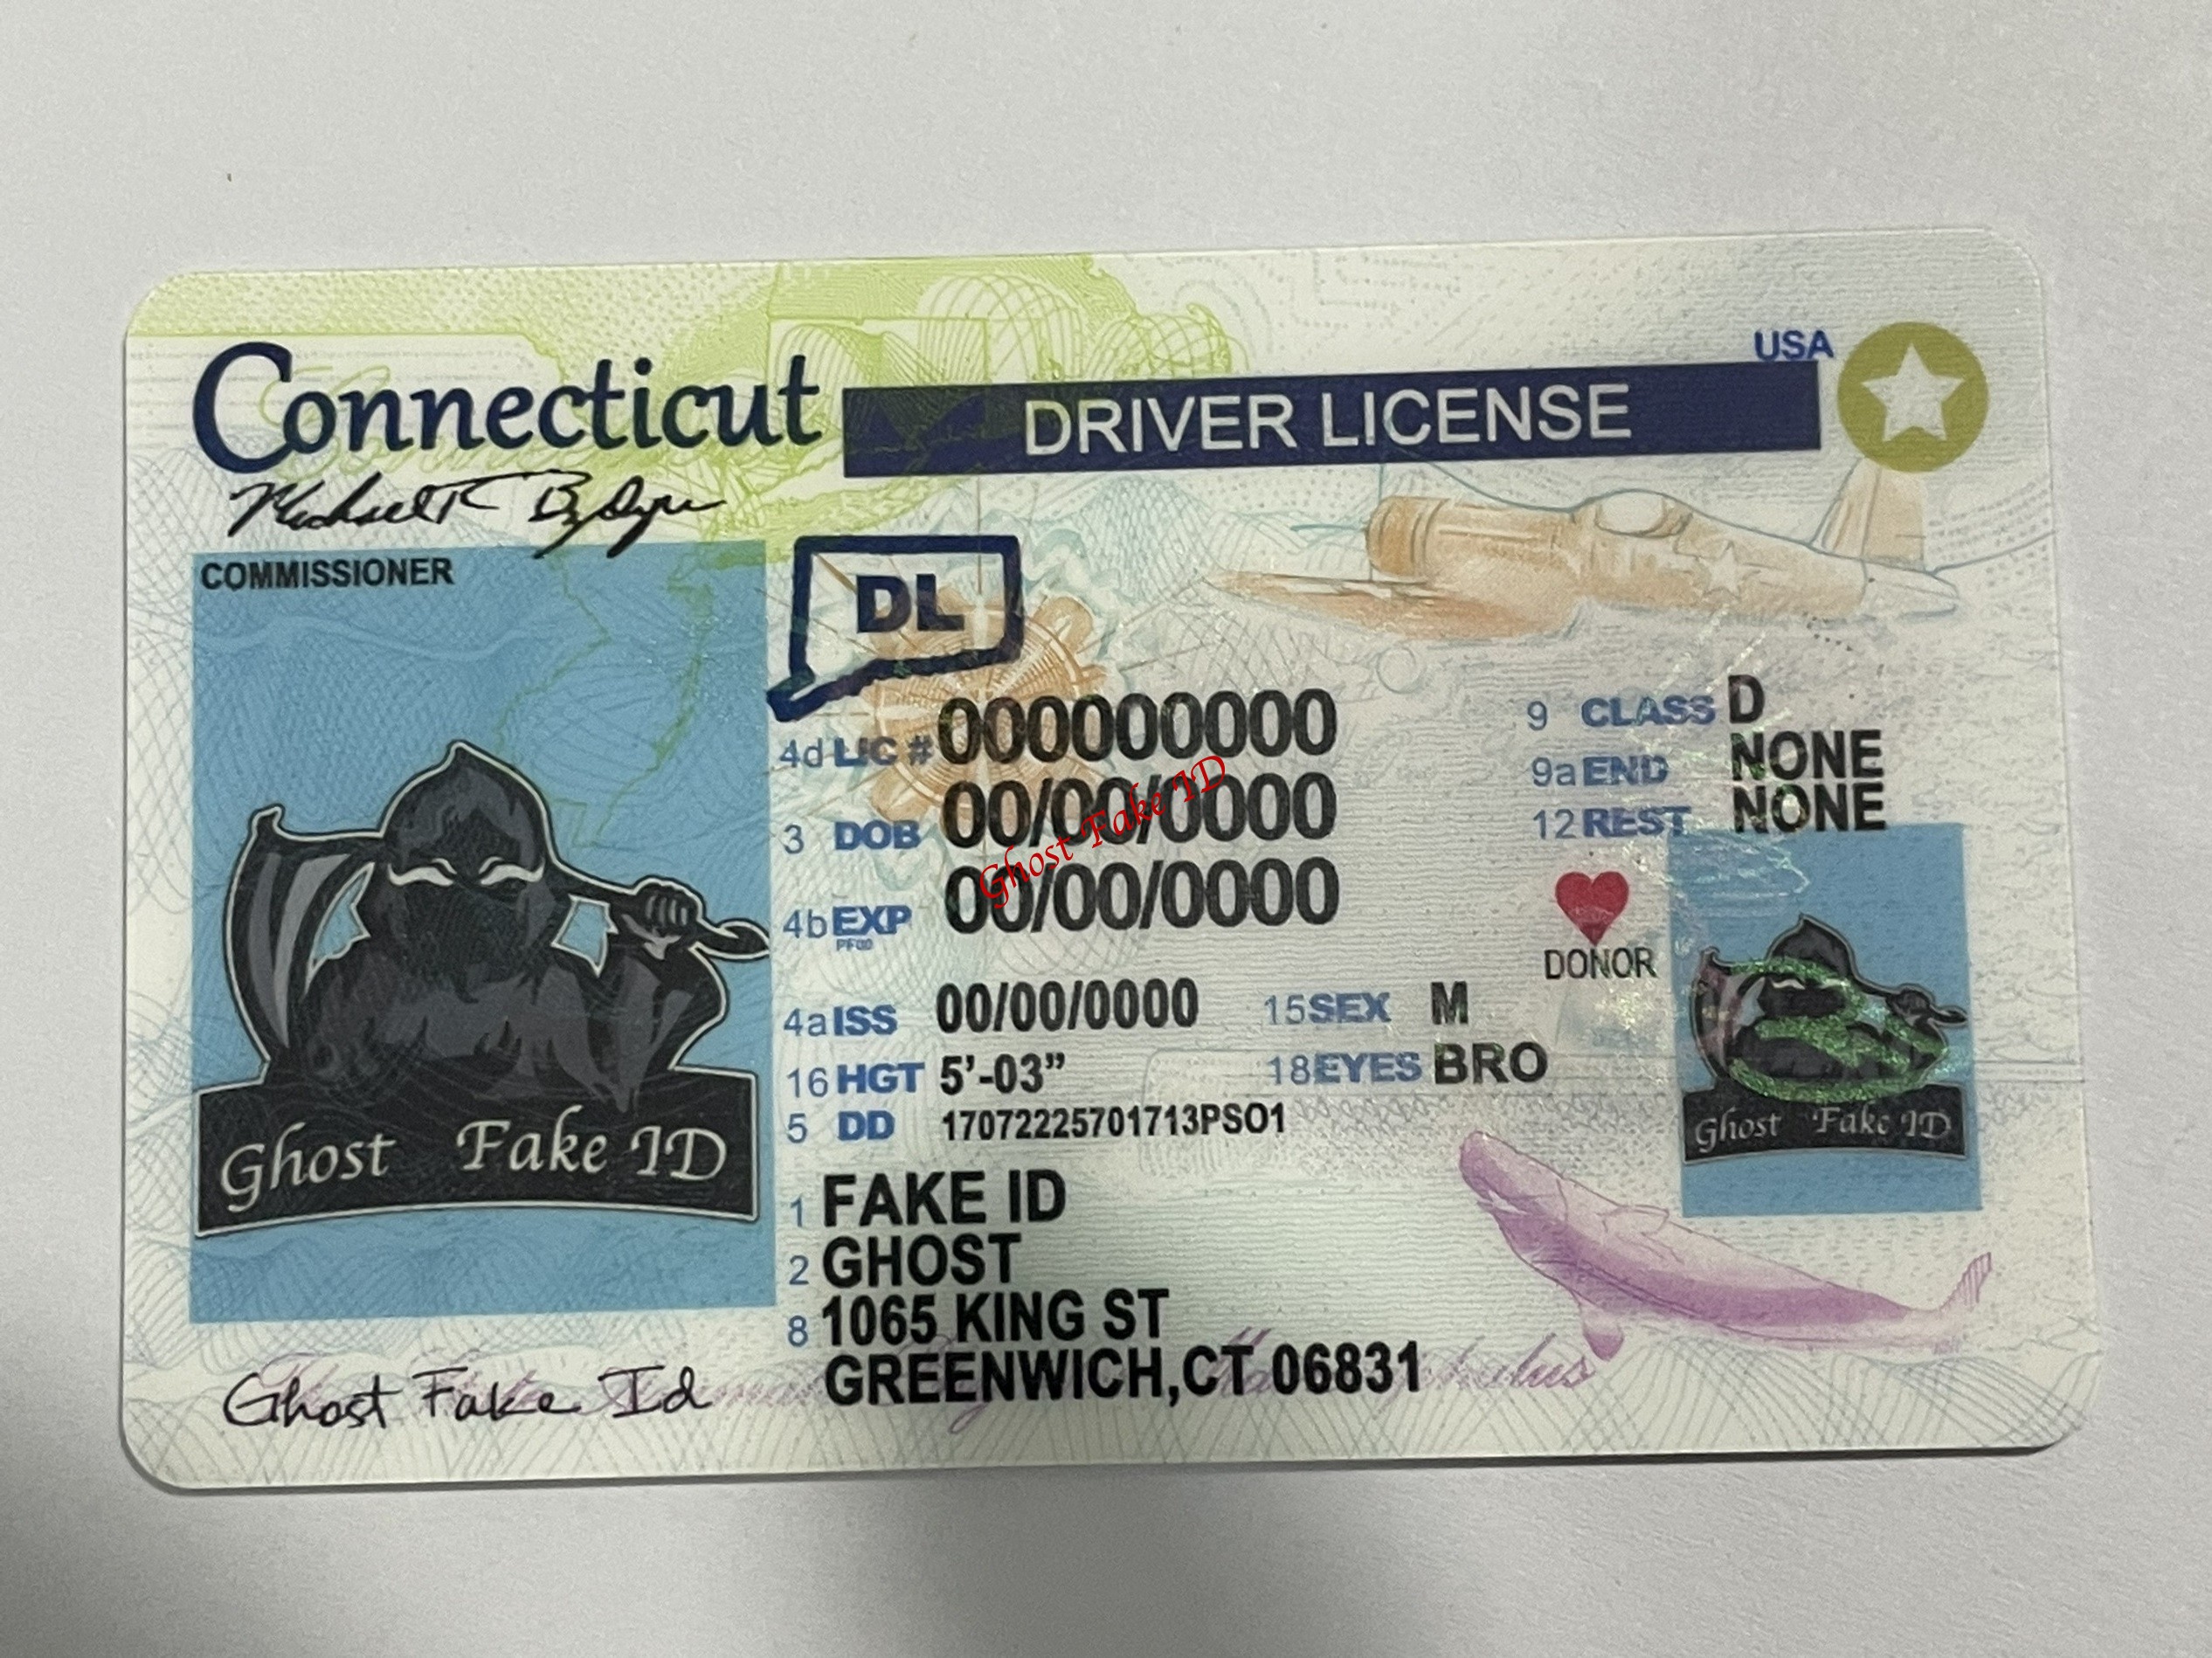 Connecticut - Scanable fake id